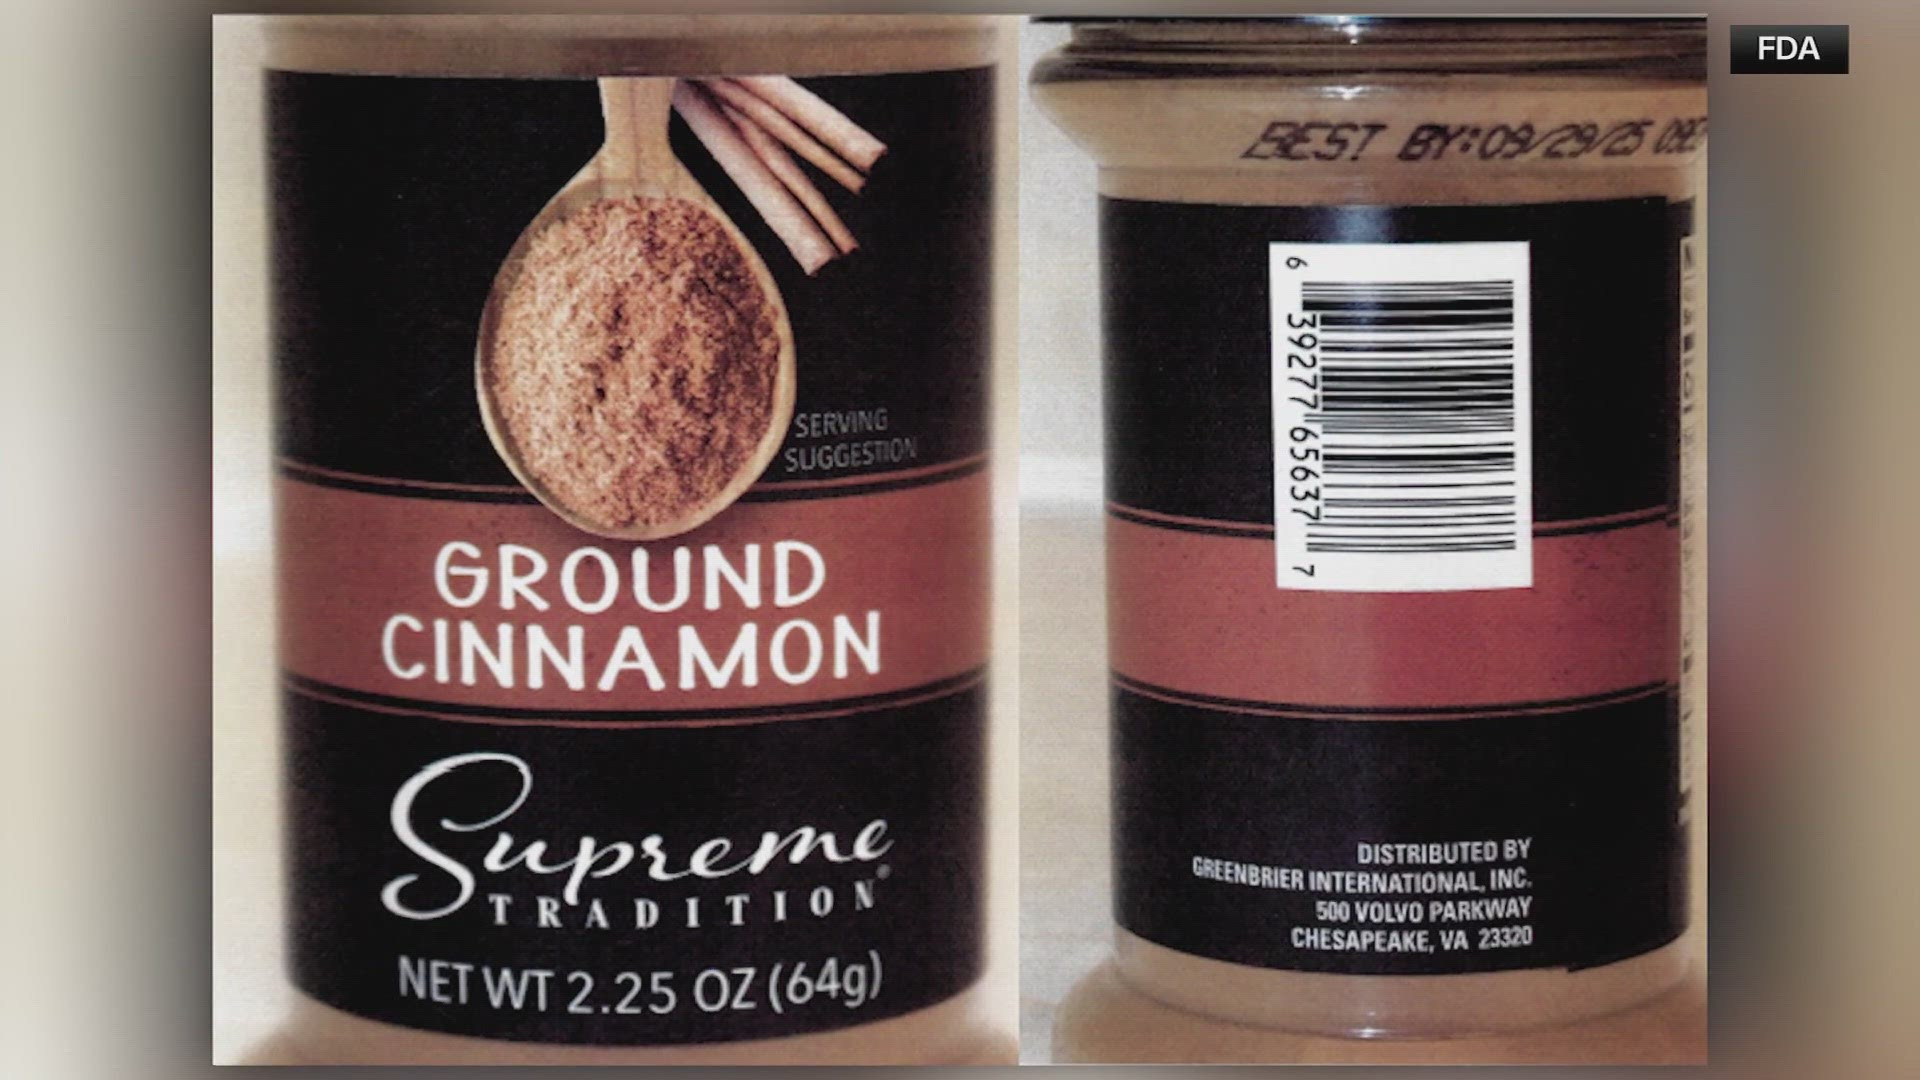 The FDA is warning cinnamon sold by stores including Dollar Tree and Family Dollar contains lead at levels unsafe for people, especially children.